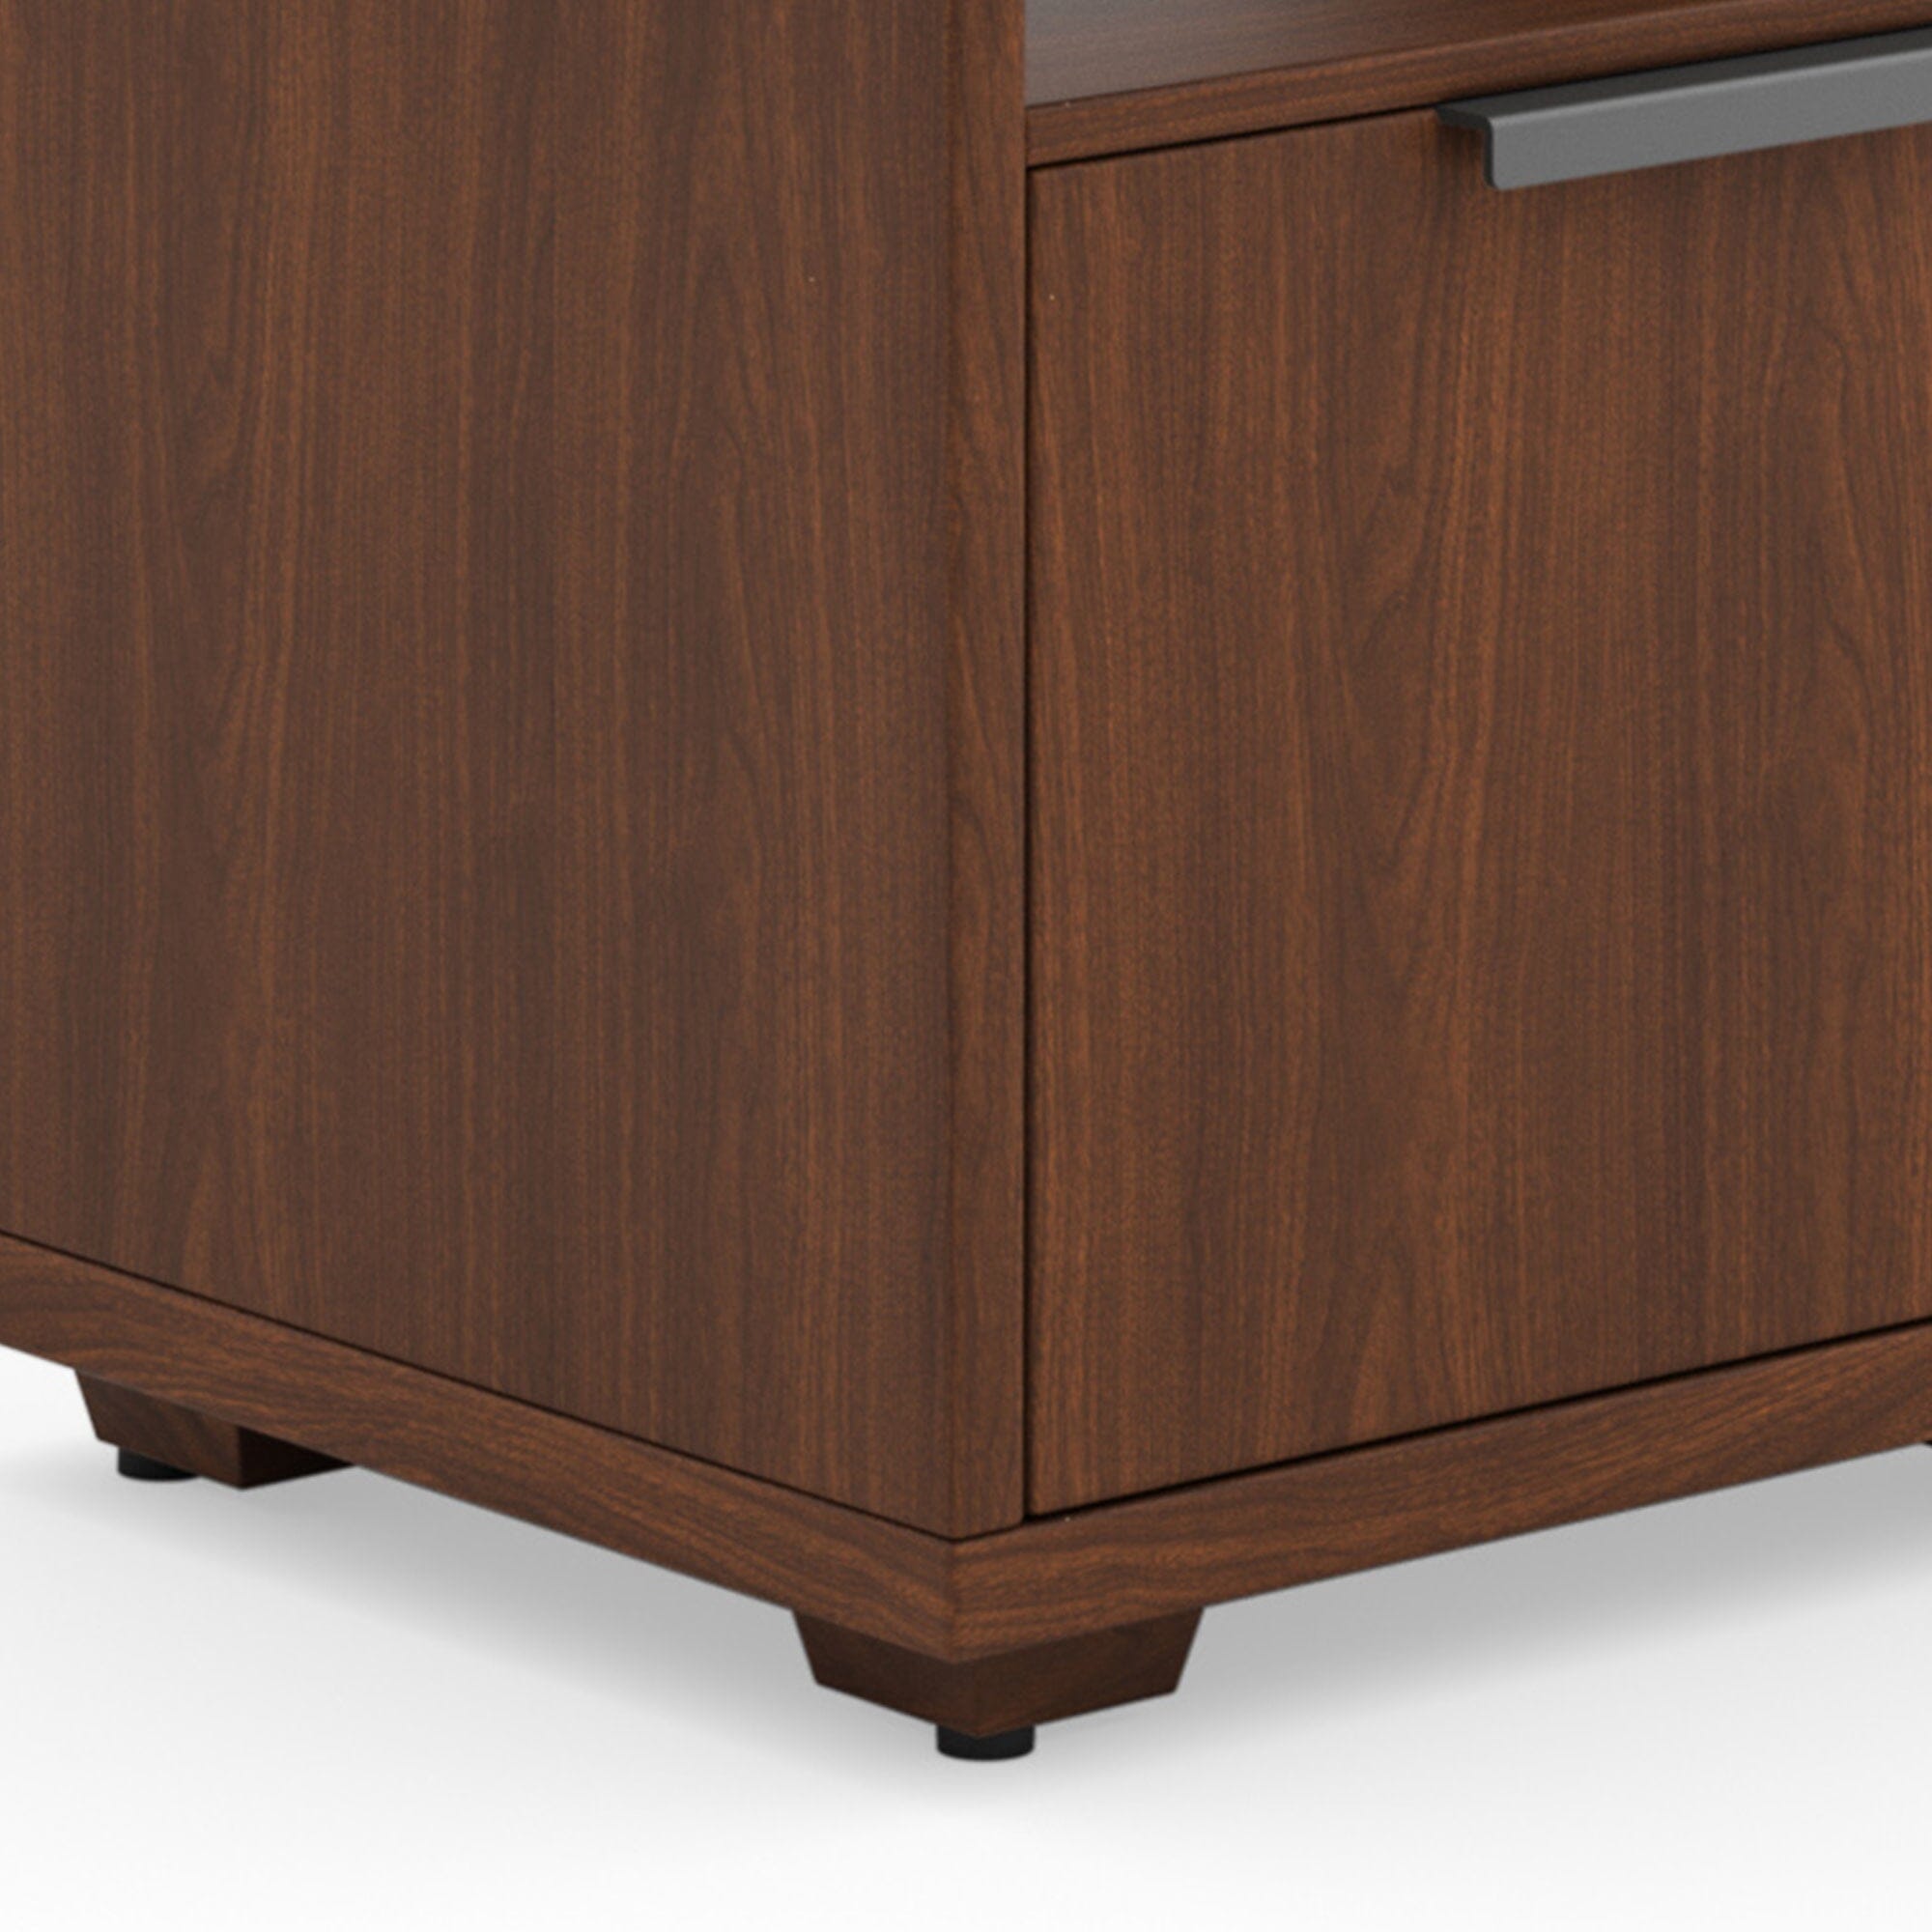 Modern & Contemporary File Cabinet By Merge File Cabinet Merge